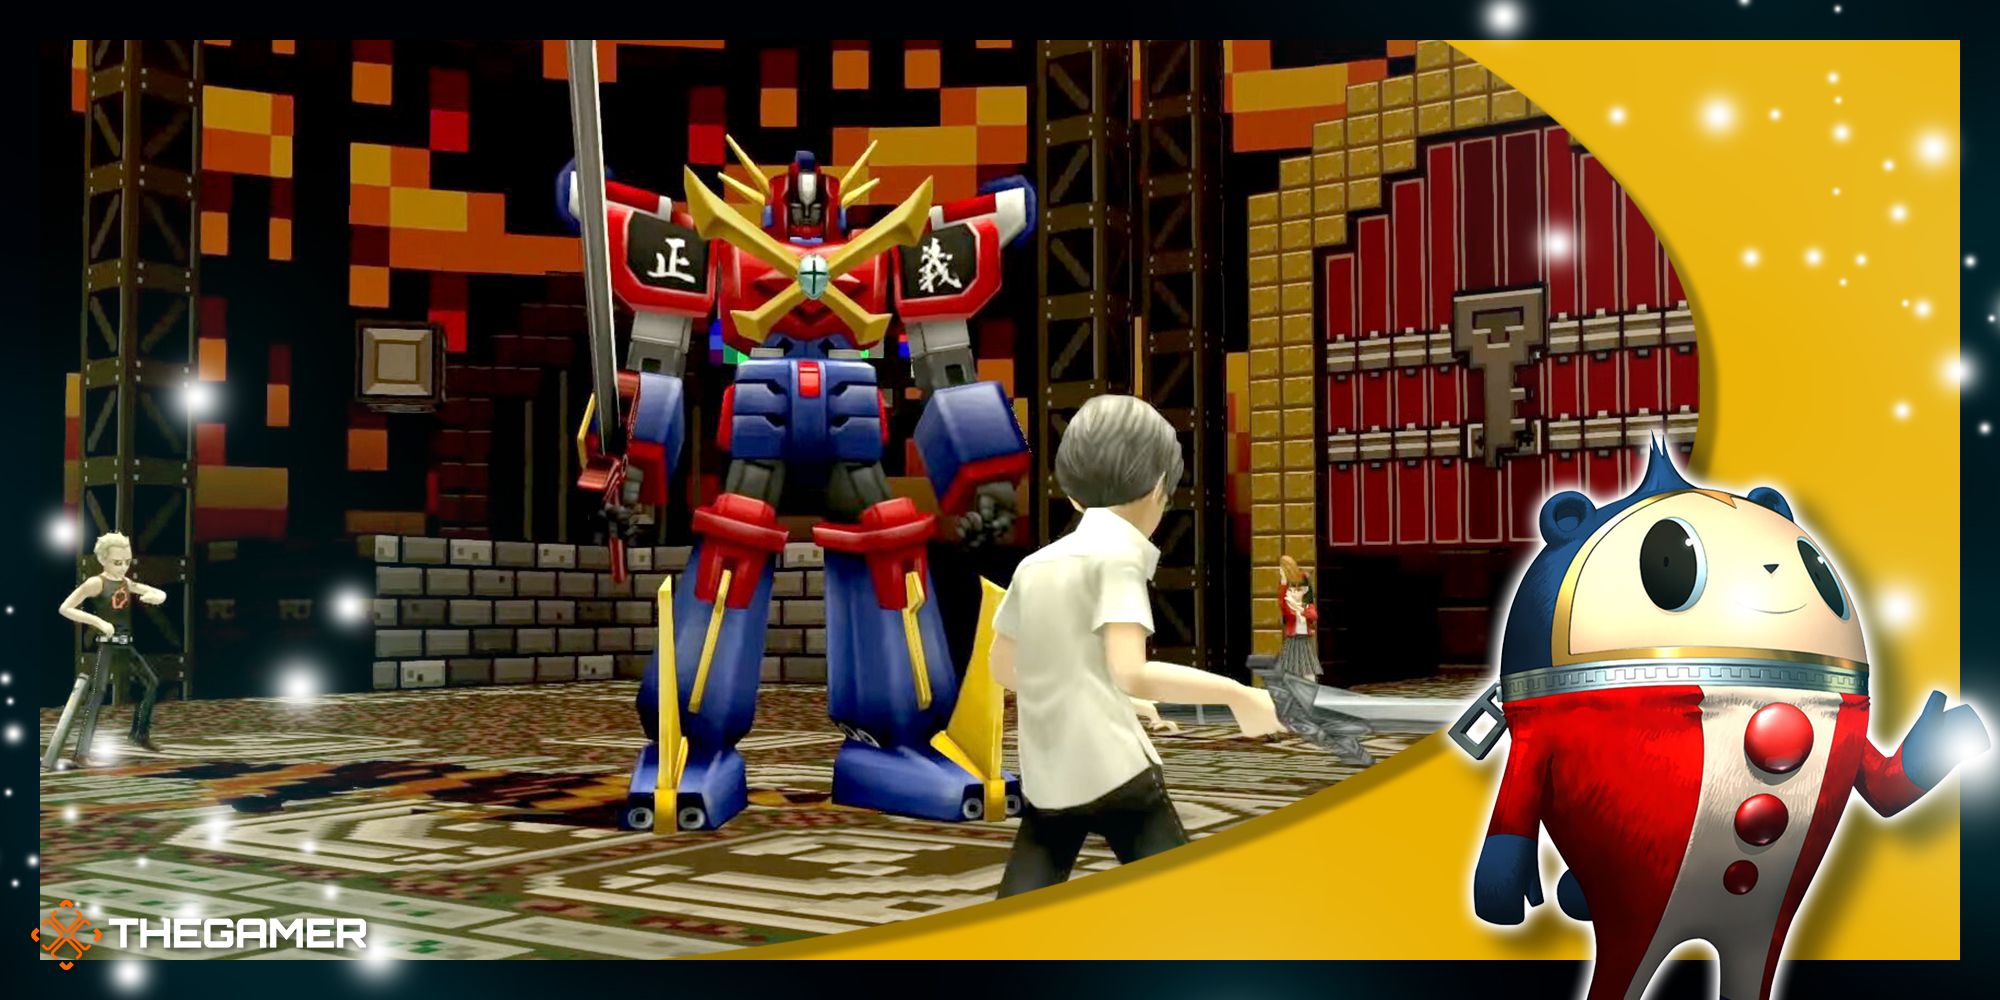 yu narukami and kanji tatsumi about to battle escapist soldier in the optional bonus fight boss battle in void quest persona 4 golden in our p4g teddie frame